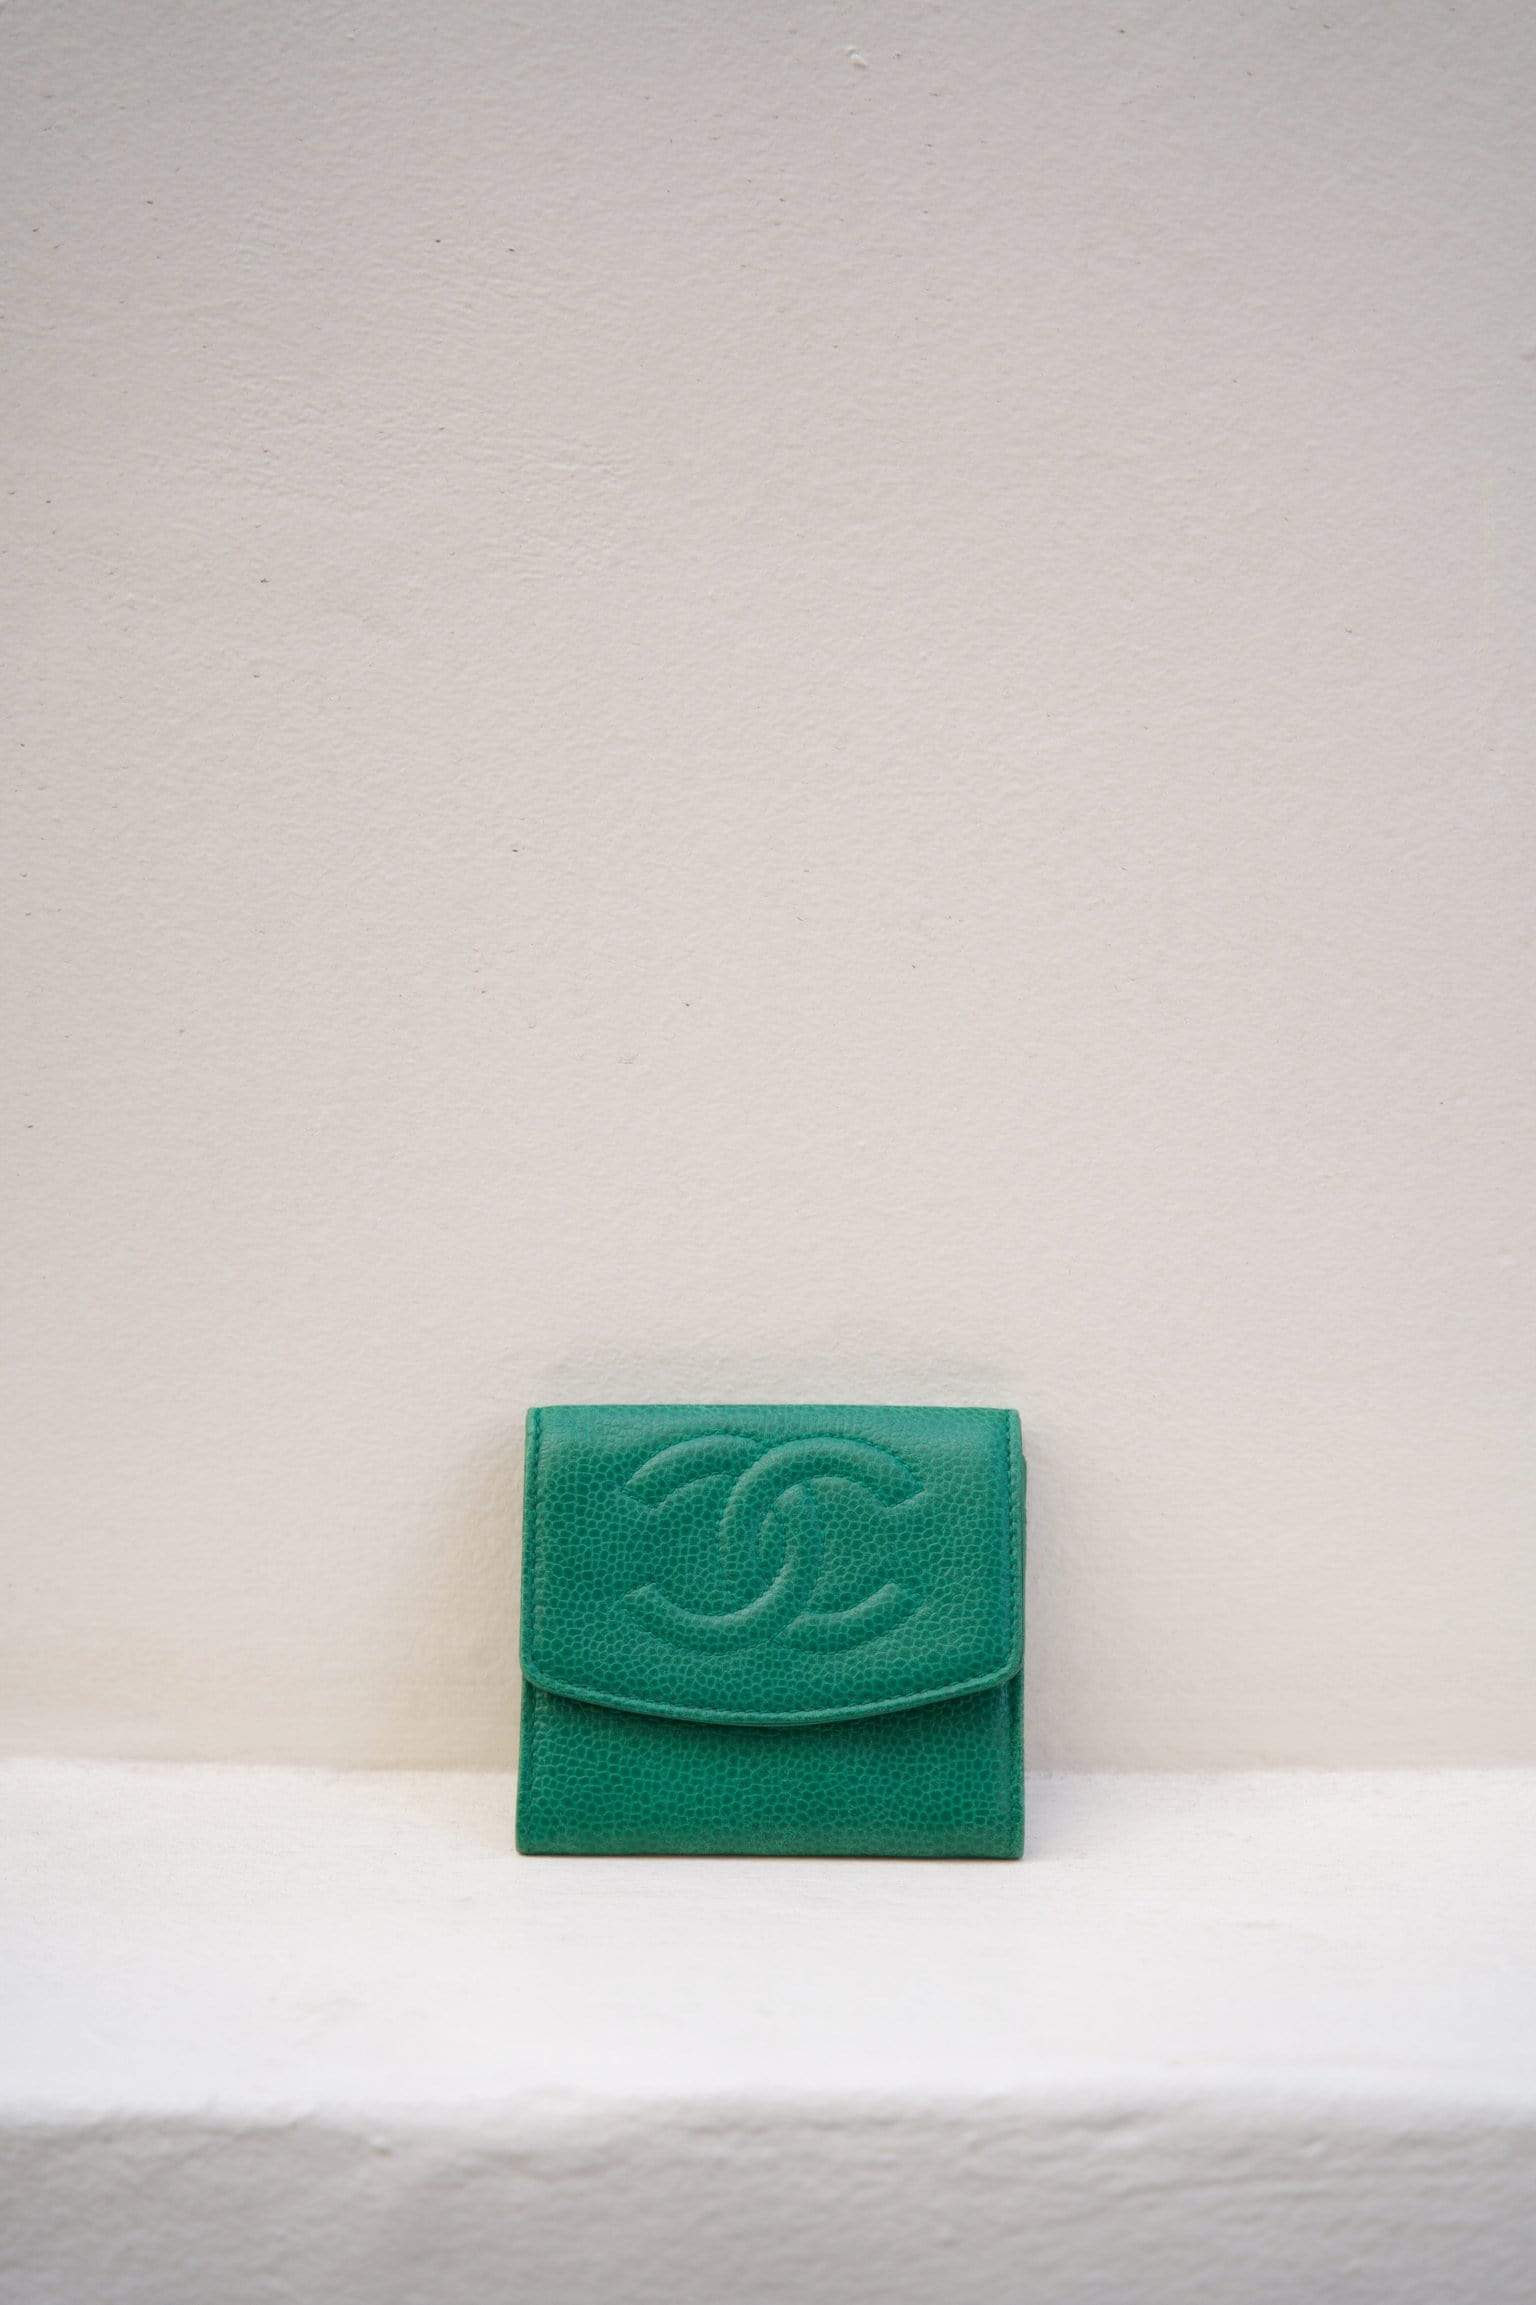 Chanel Chanel Vintage Green CC Caviar Leather Coin Pouch - AWL1899